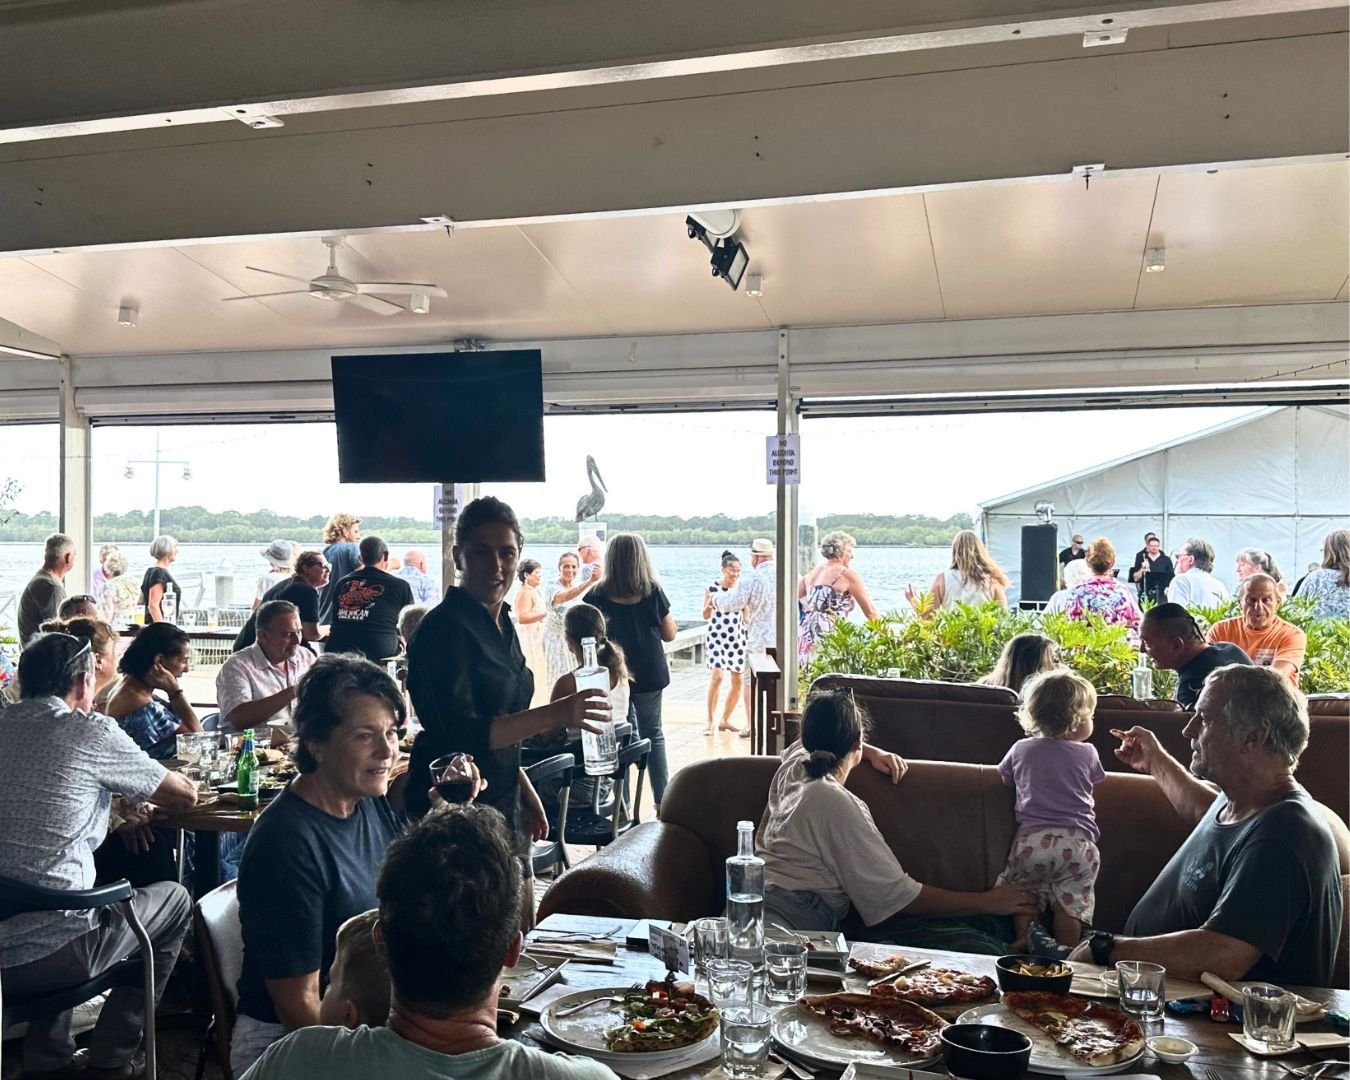 Good times, and GREAT MUSIC! Join us for the next LIVE MUSIC event on the Wharf with EPIC on Sunday June 9th.

Book now https://www.wharfbarballina.com.au/book